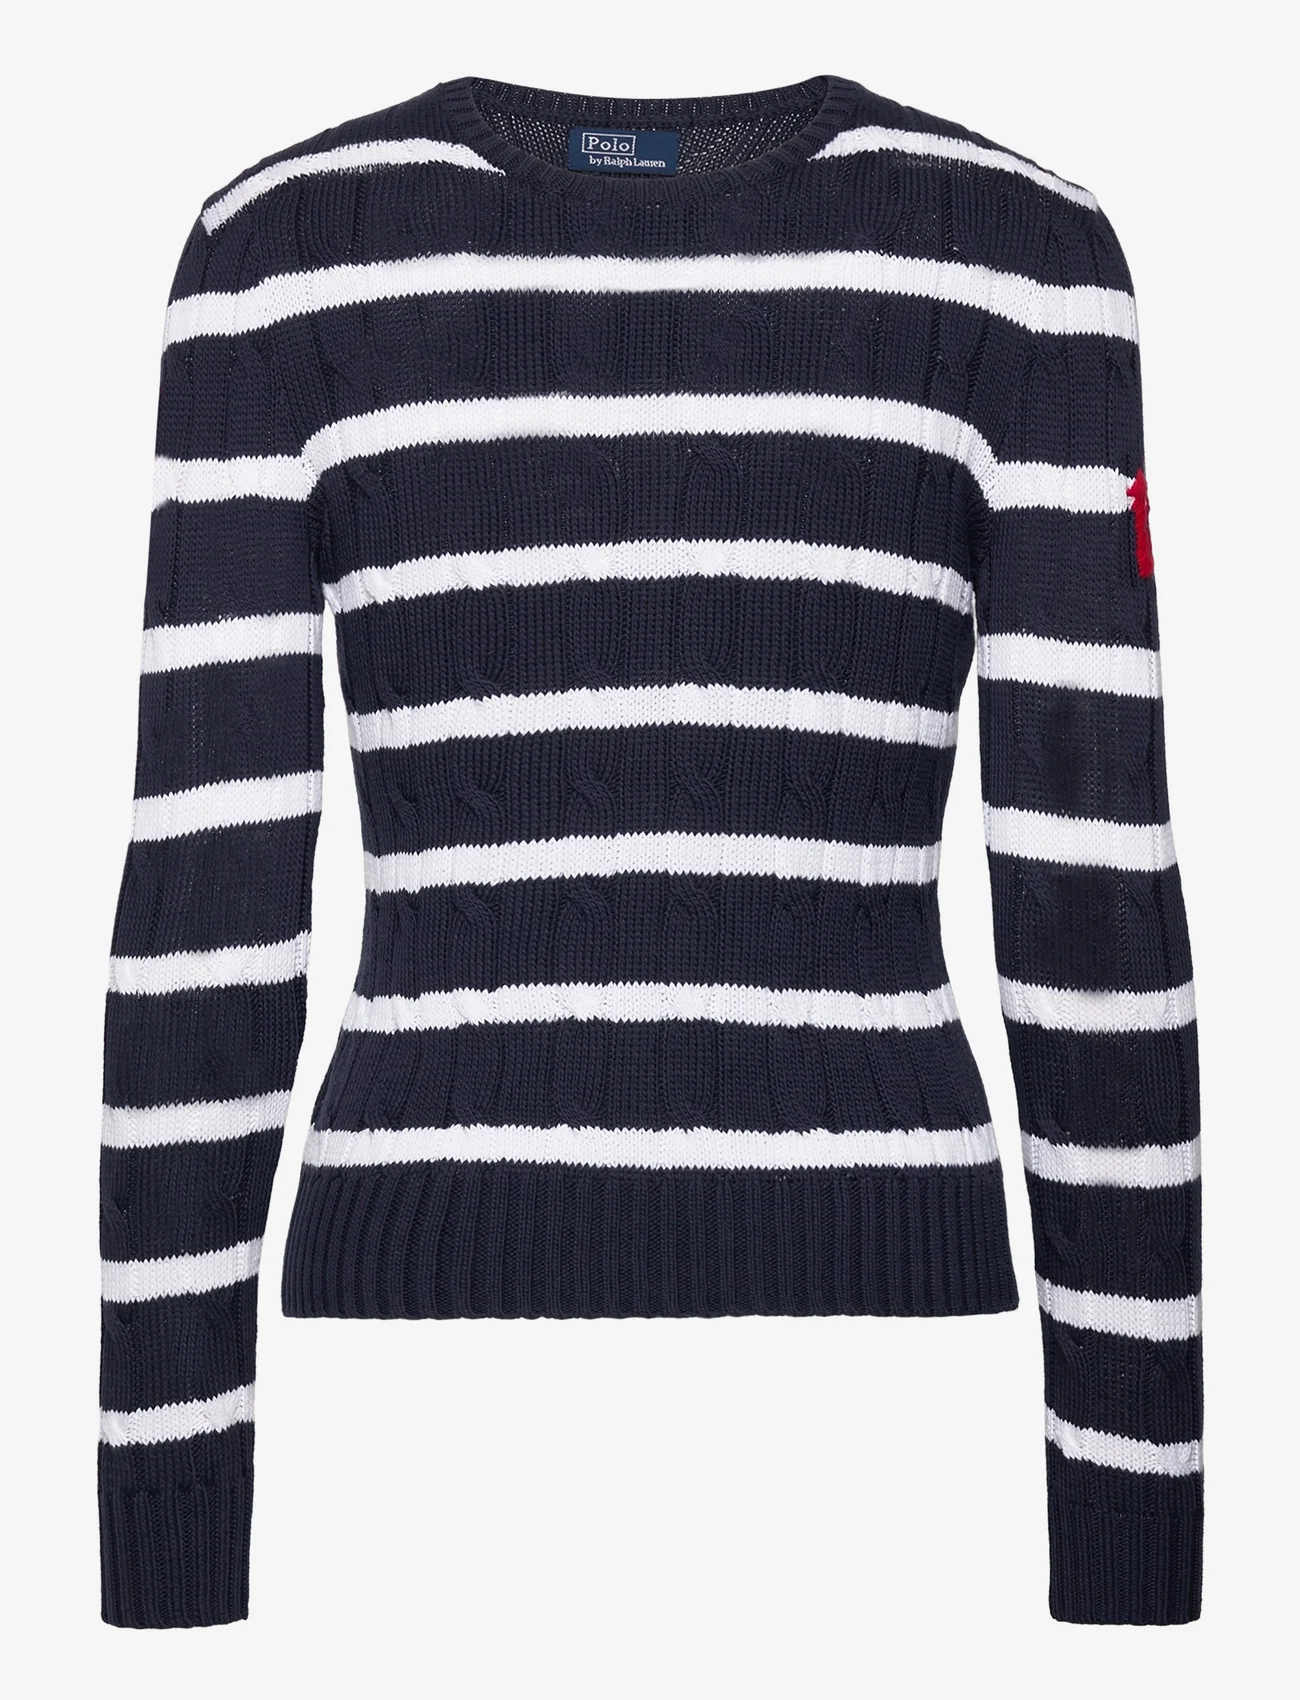 Polo Ralph Lauren - Anchor-Motif Cable Cotton Sweater - jumpers - hunter navy/white - 0